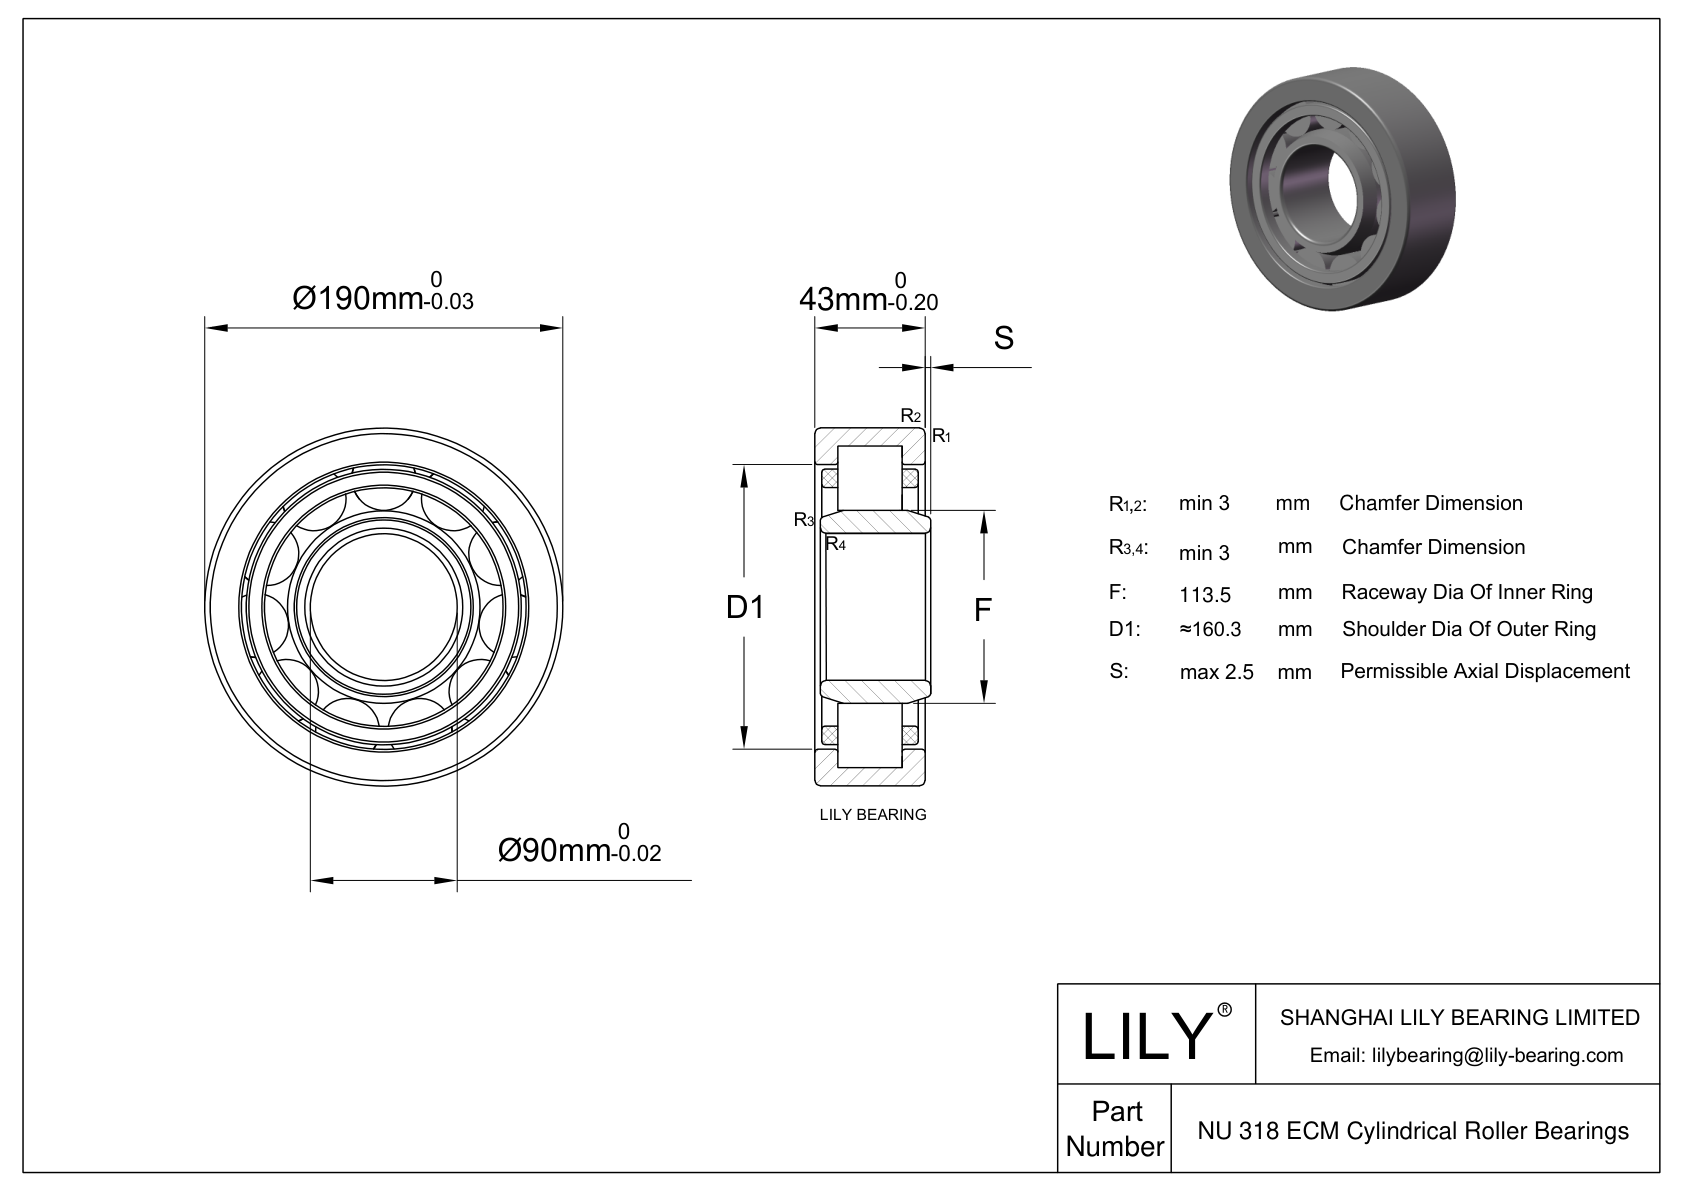 NU 318 ECM/C3VL0241 Ceramic Coated Cylindrical Roller Bearings cad drawing